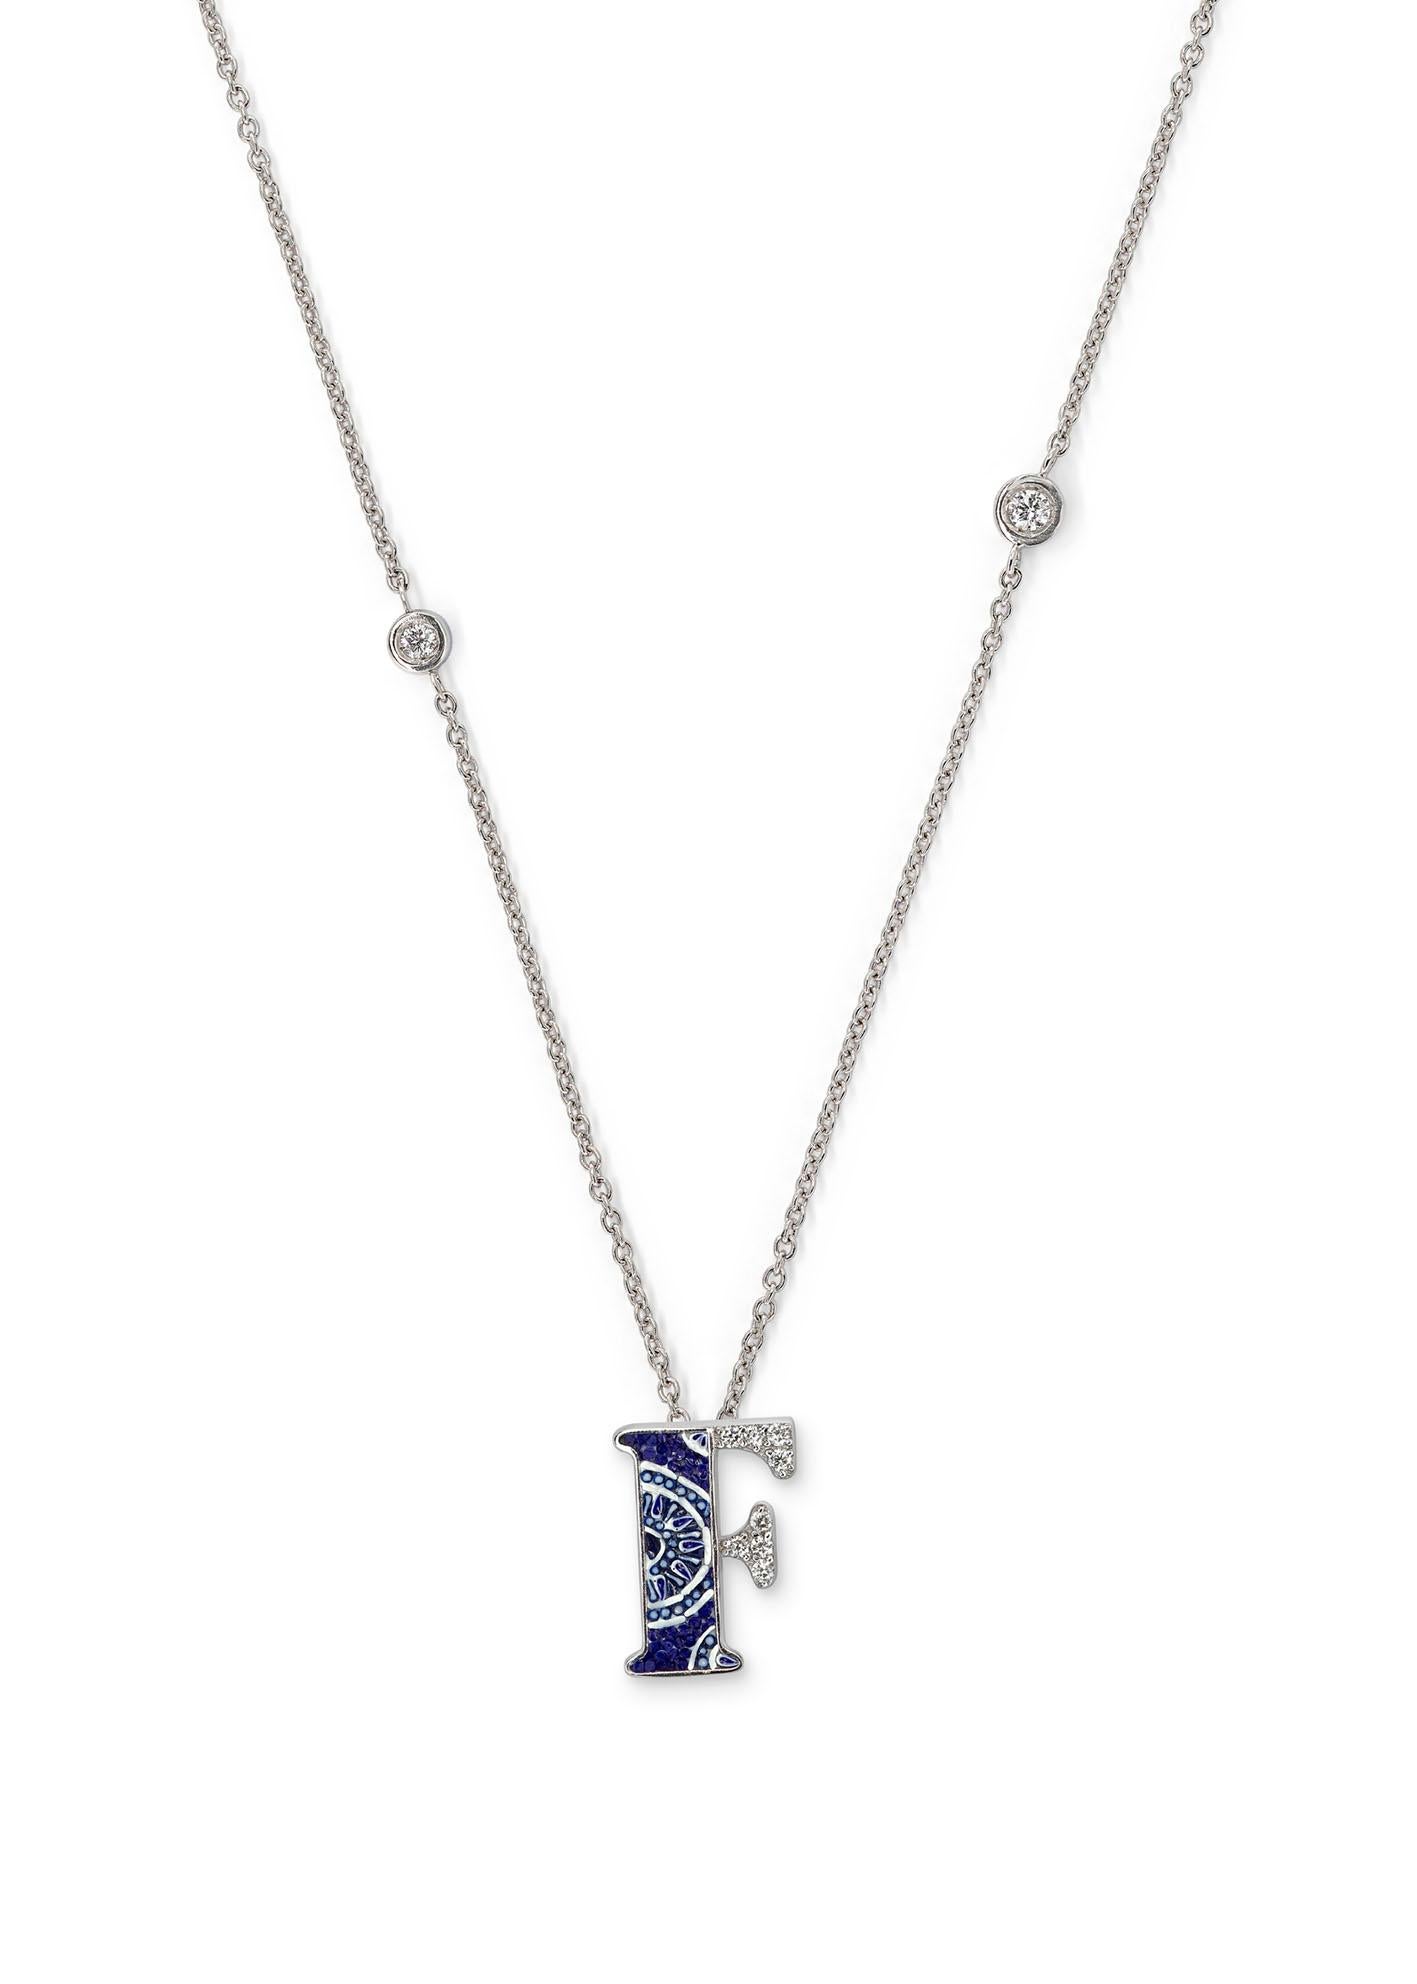 Contemporary Necklace Letter F White Gold White Diamonds Hand Decorated with Micromosaic For Sale